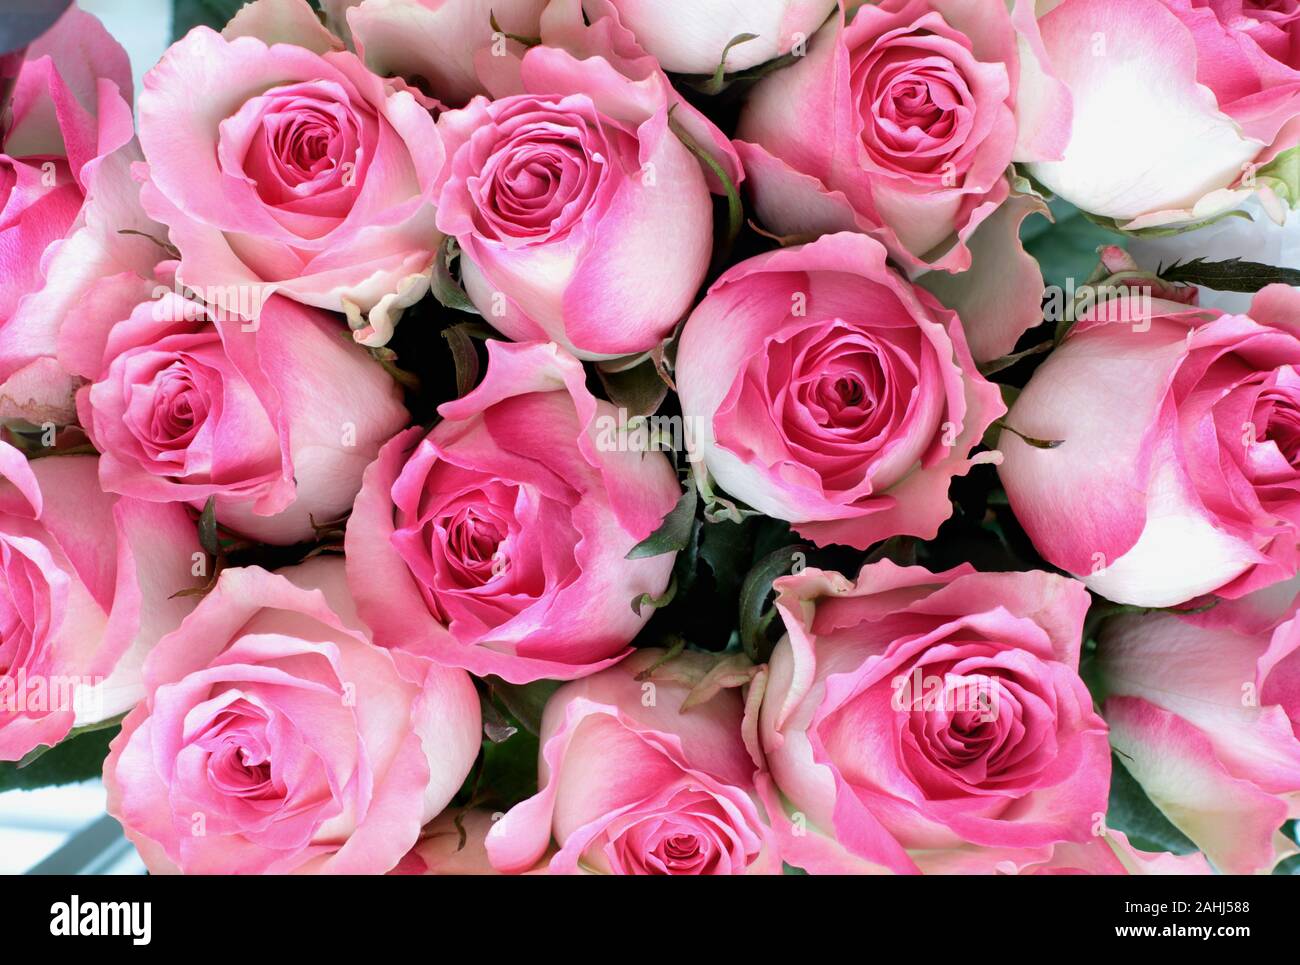 Beautiful Pink And White Rose Flower Background Image Shot From Top View Stock Photo Alamy